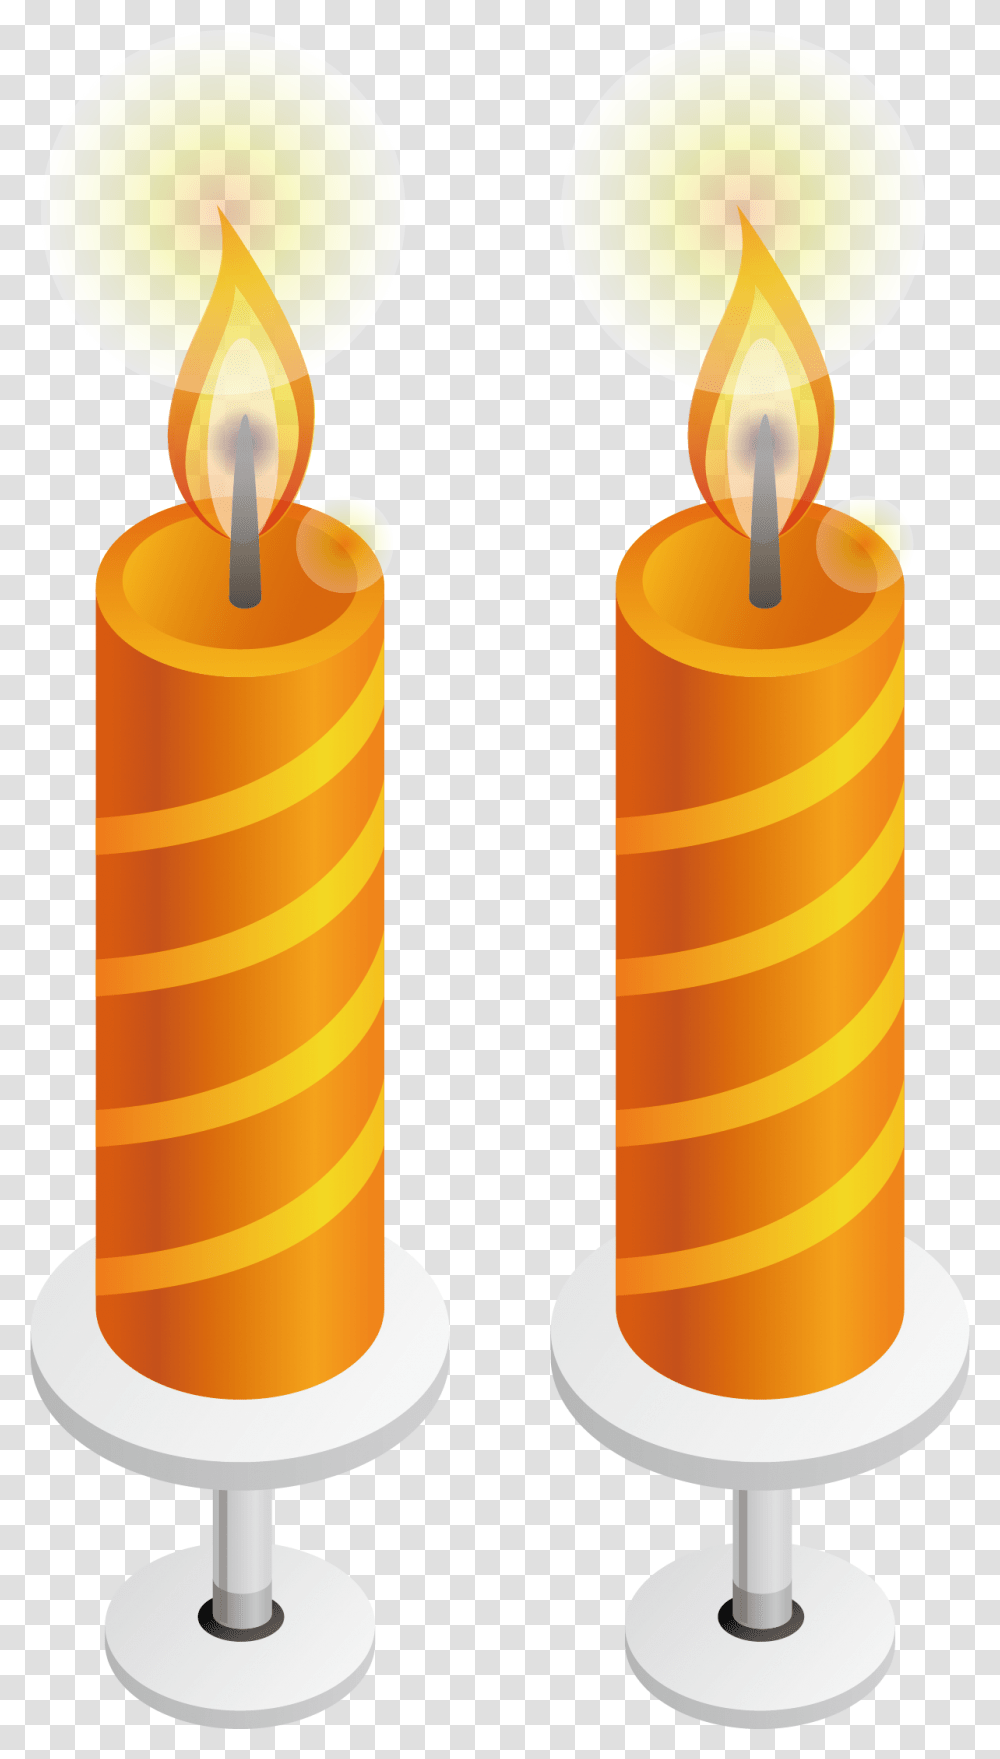 Candle Vector Element Download Flame, Weapon, Weaponry, Bomb, Dynamite Transparent Png